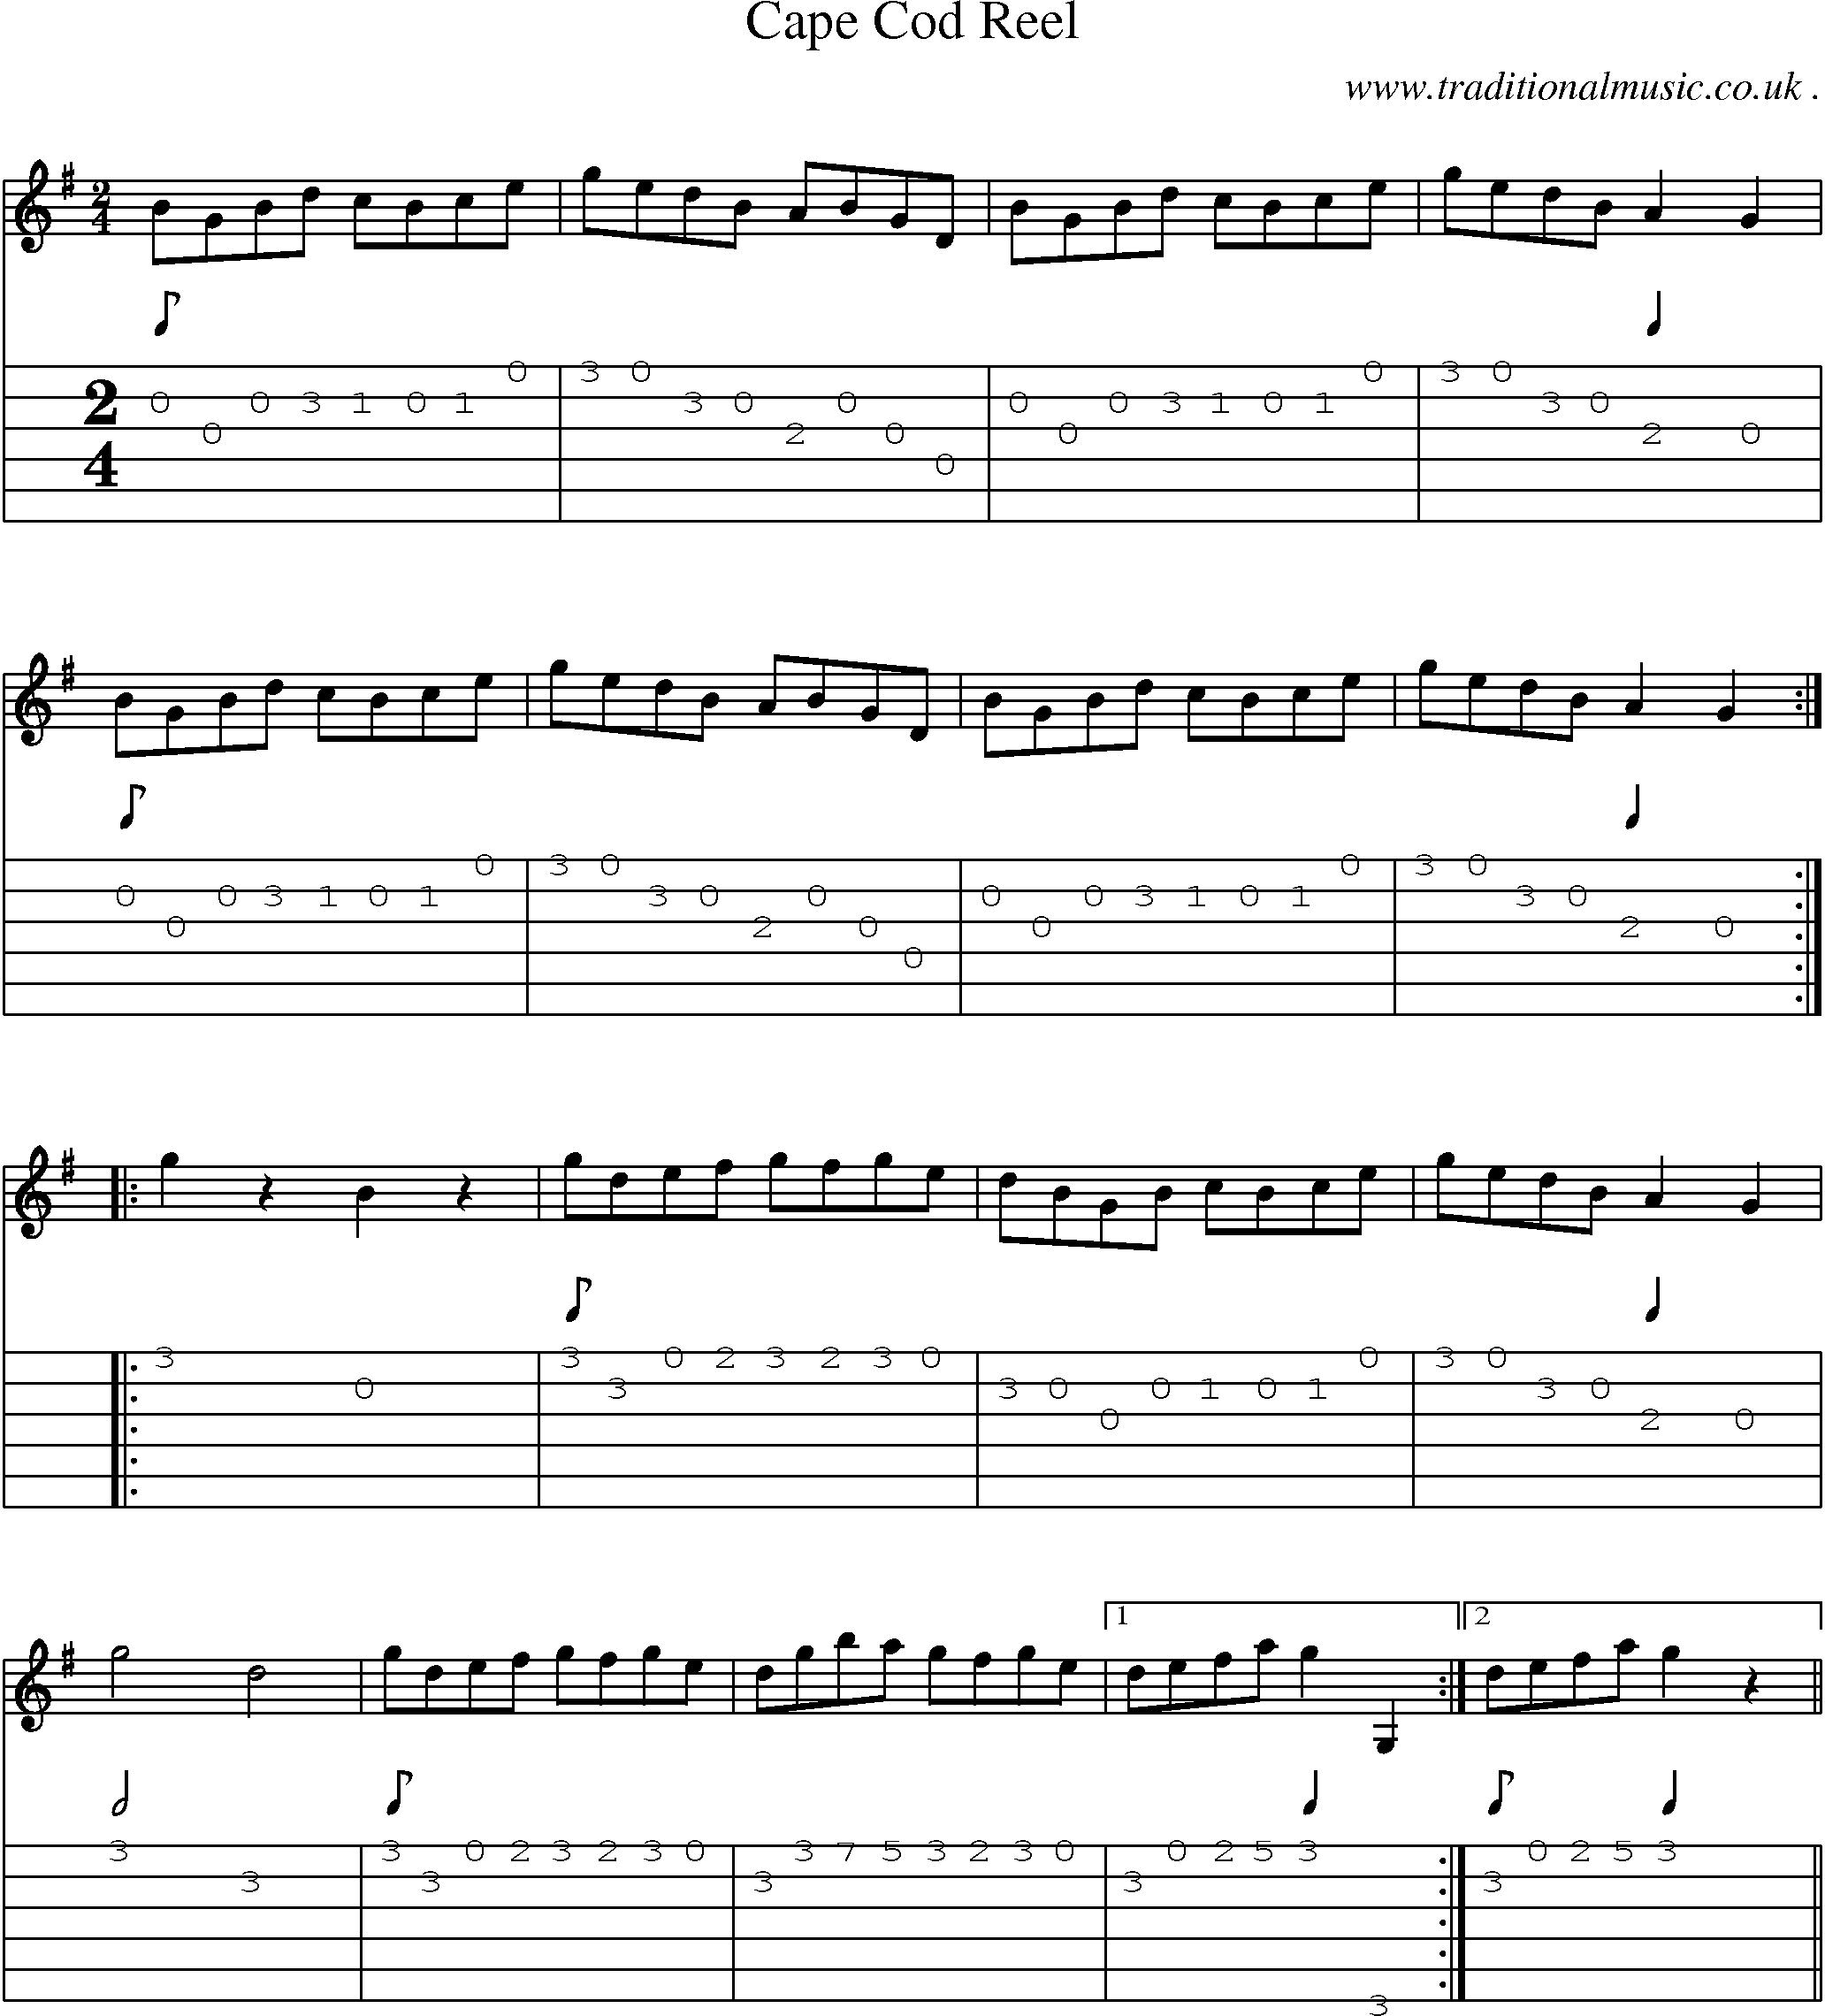 Music Score and Guitar Tabs for Cape Cod Reel